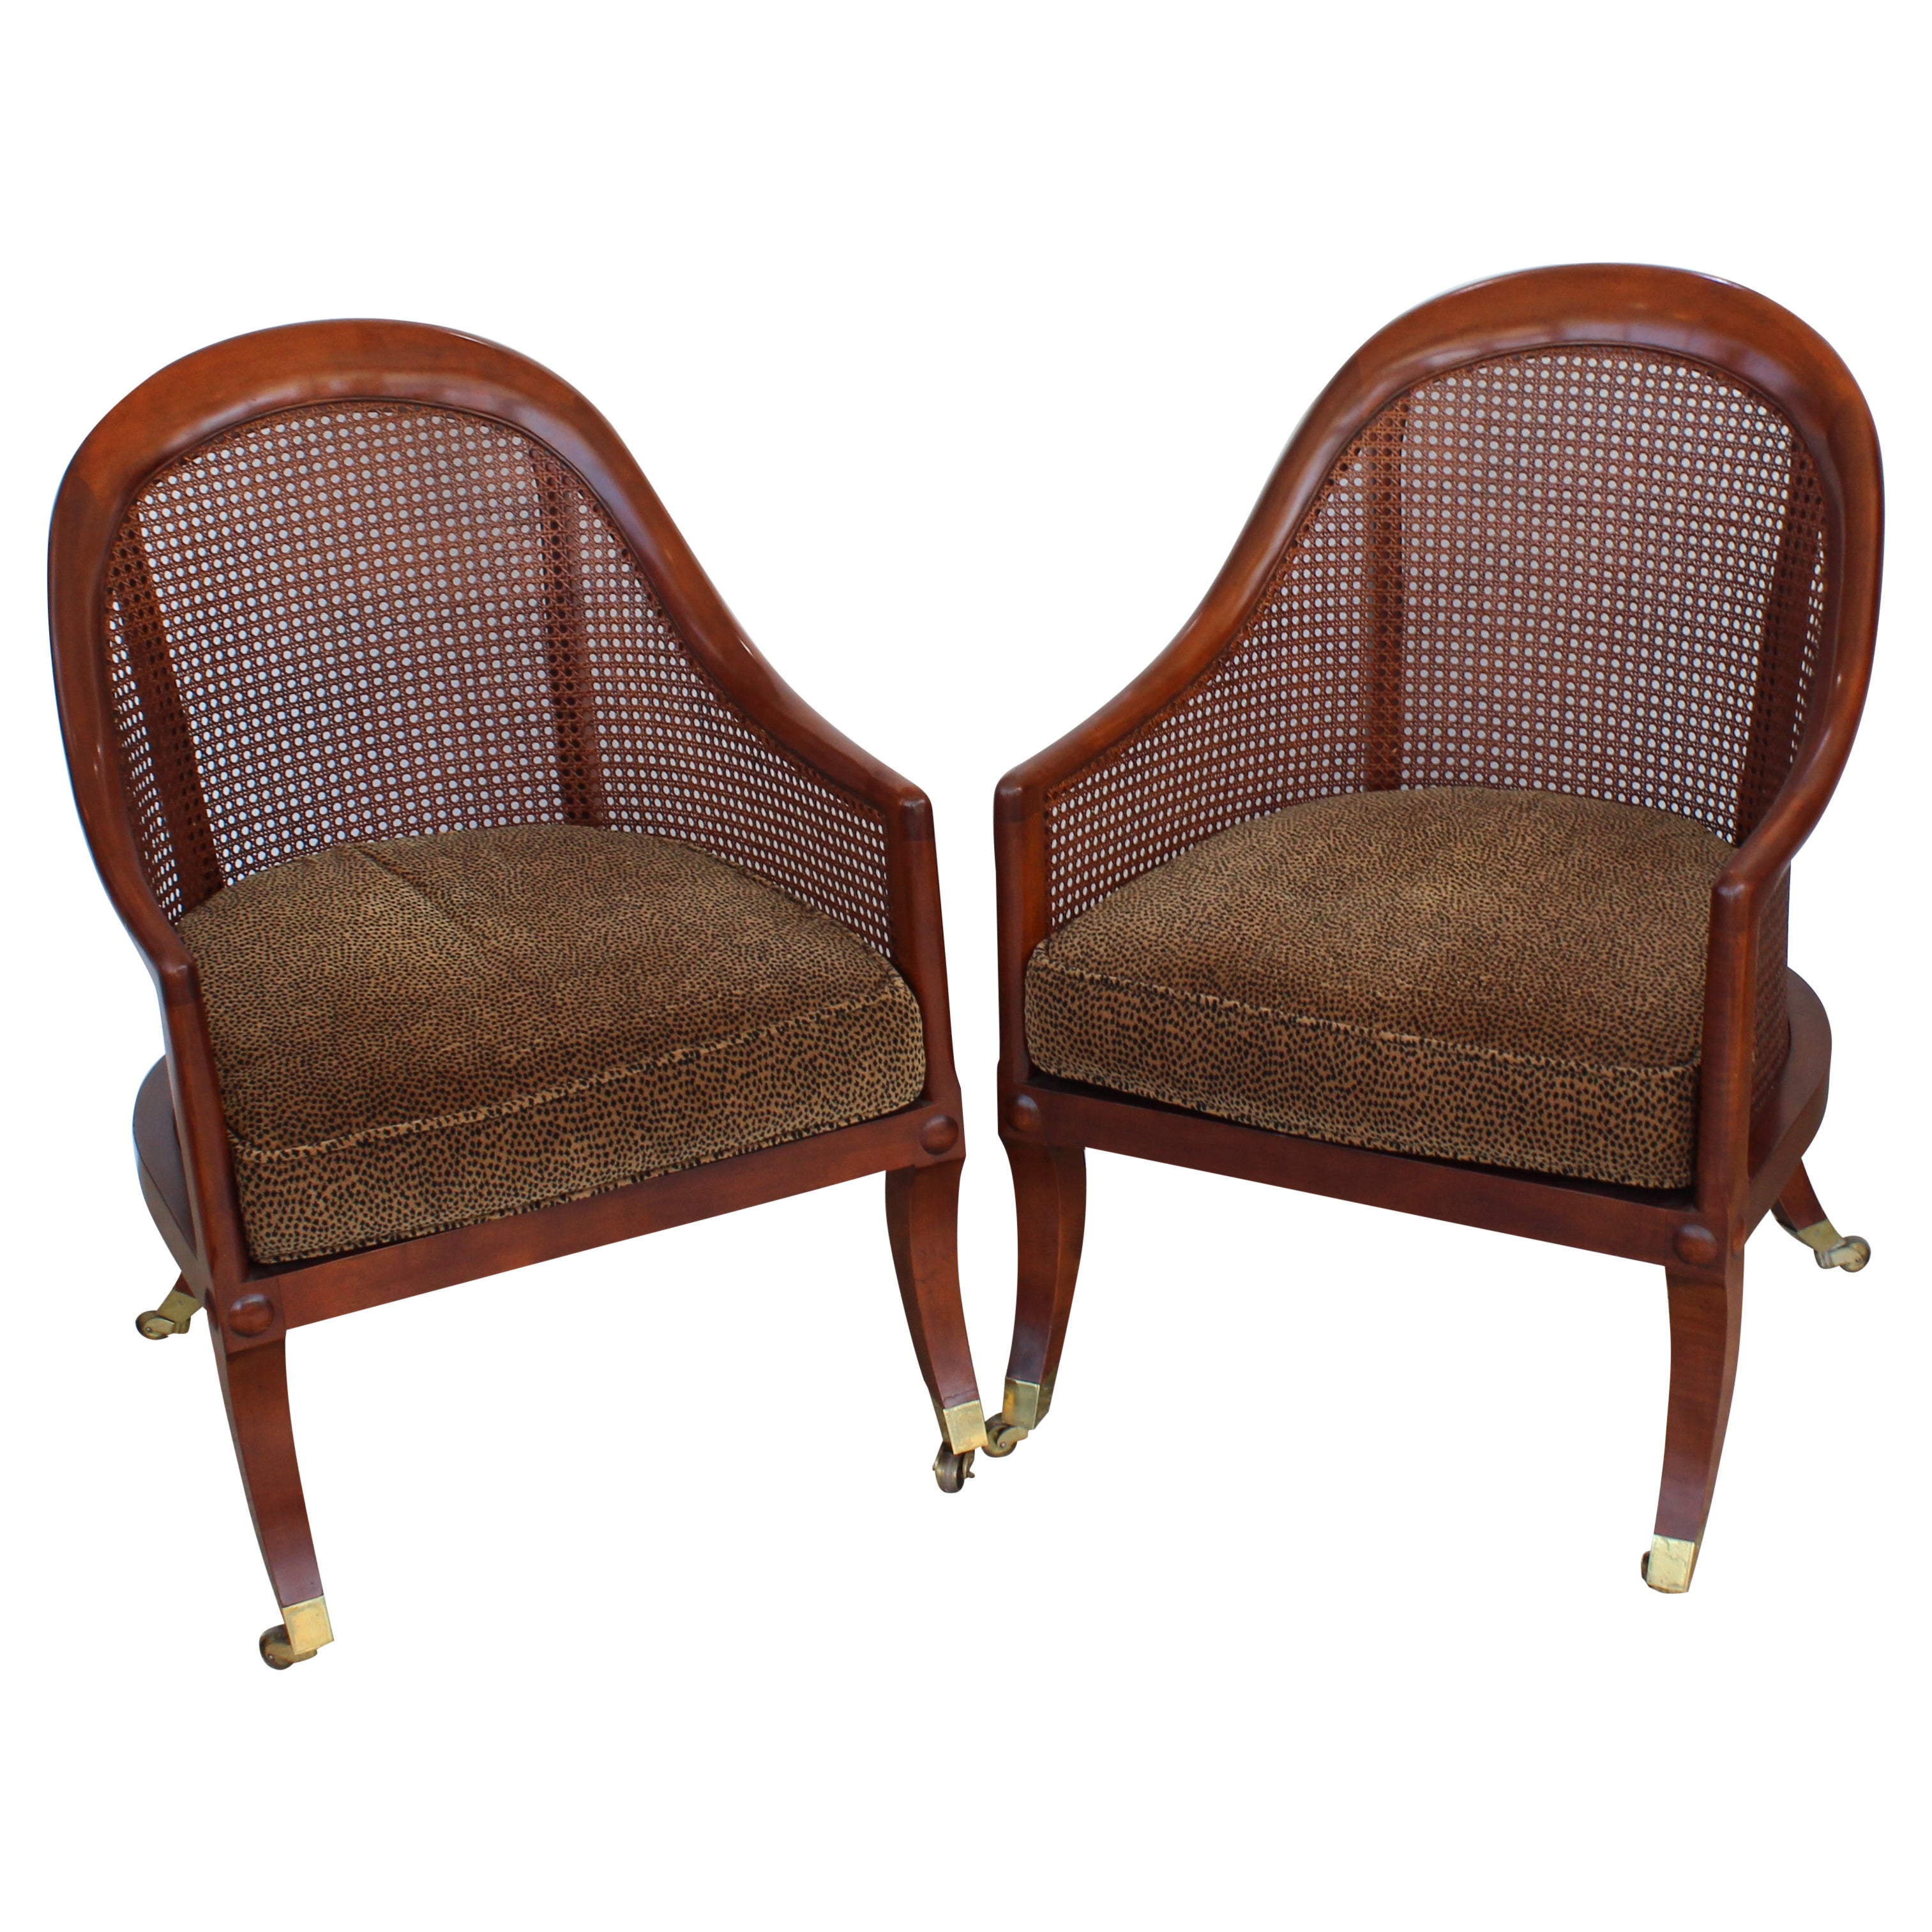 Pair of Regency Style Chairs by Baker For Sale